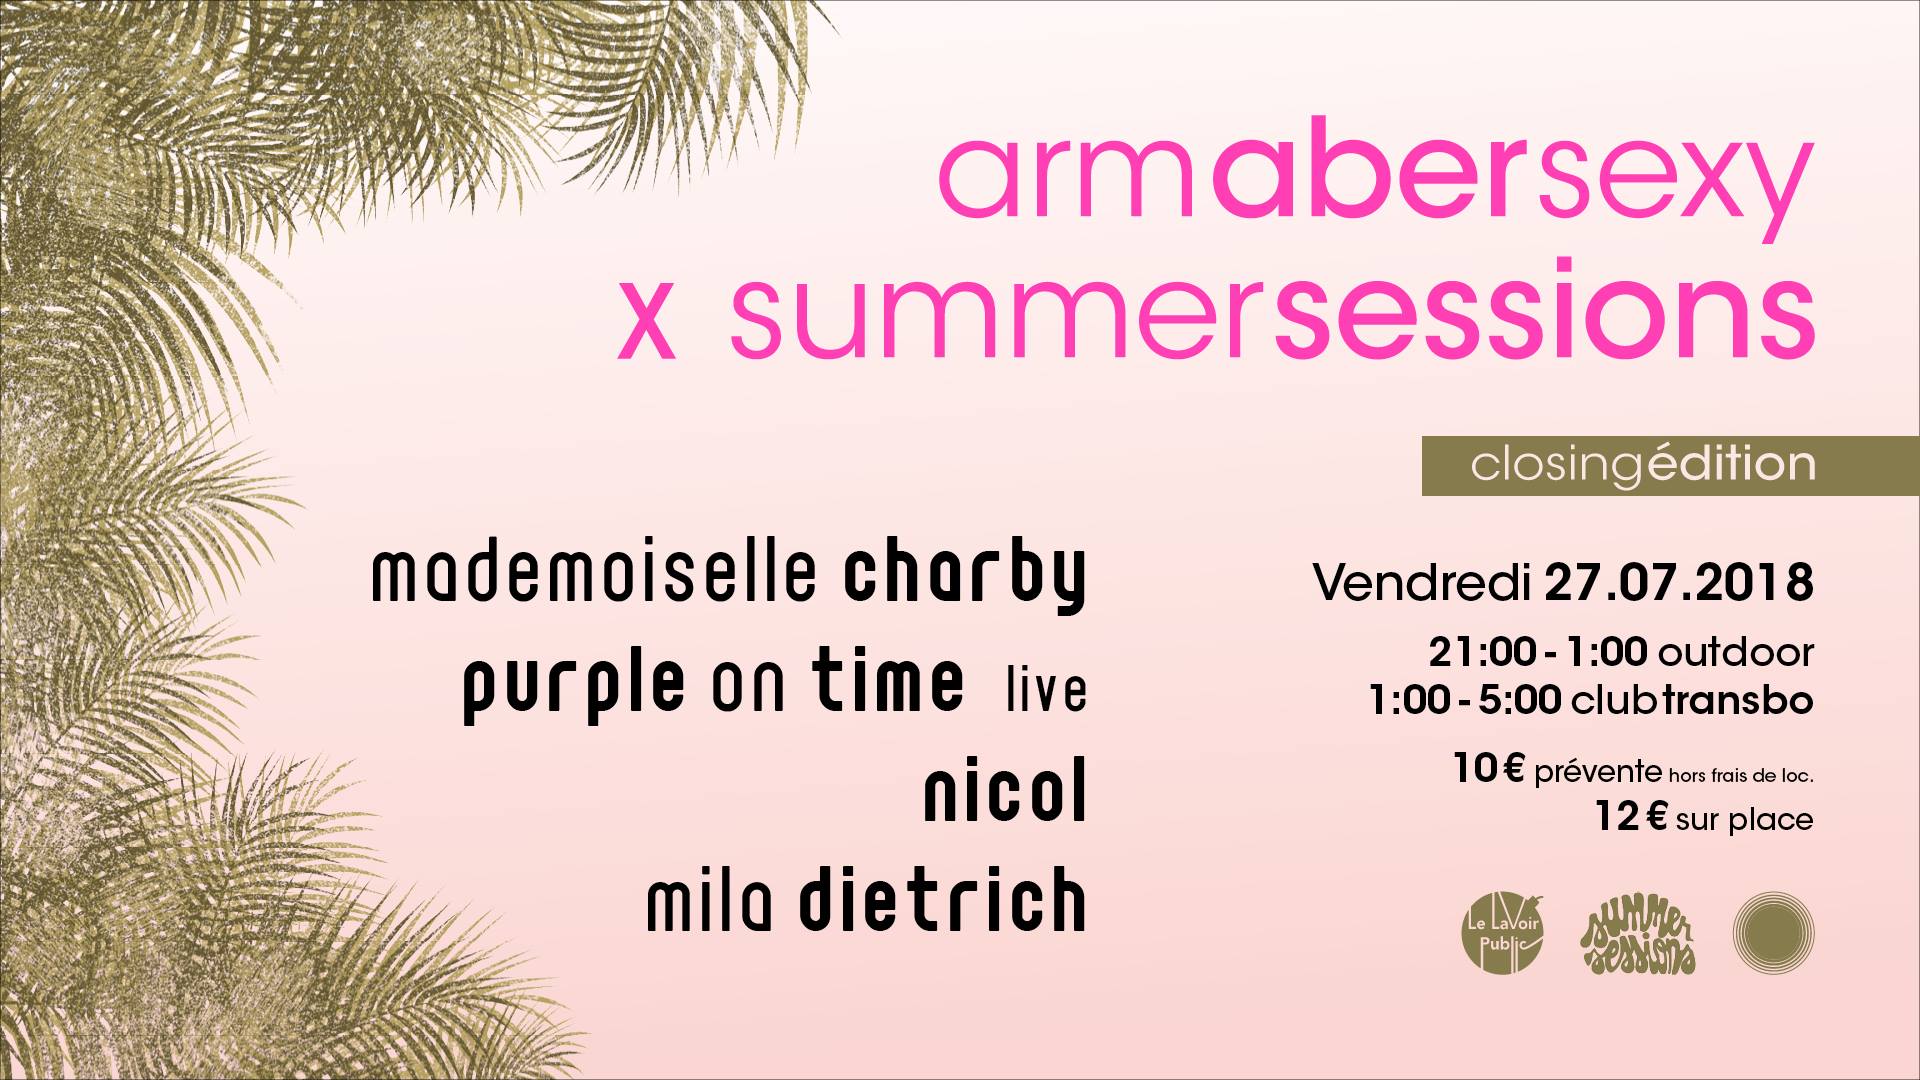 arm aber sexy summer sessions mademoiselle charby vendredi 27 juillet